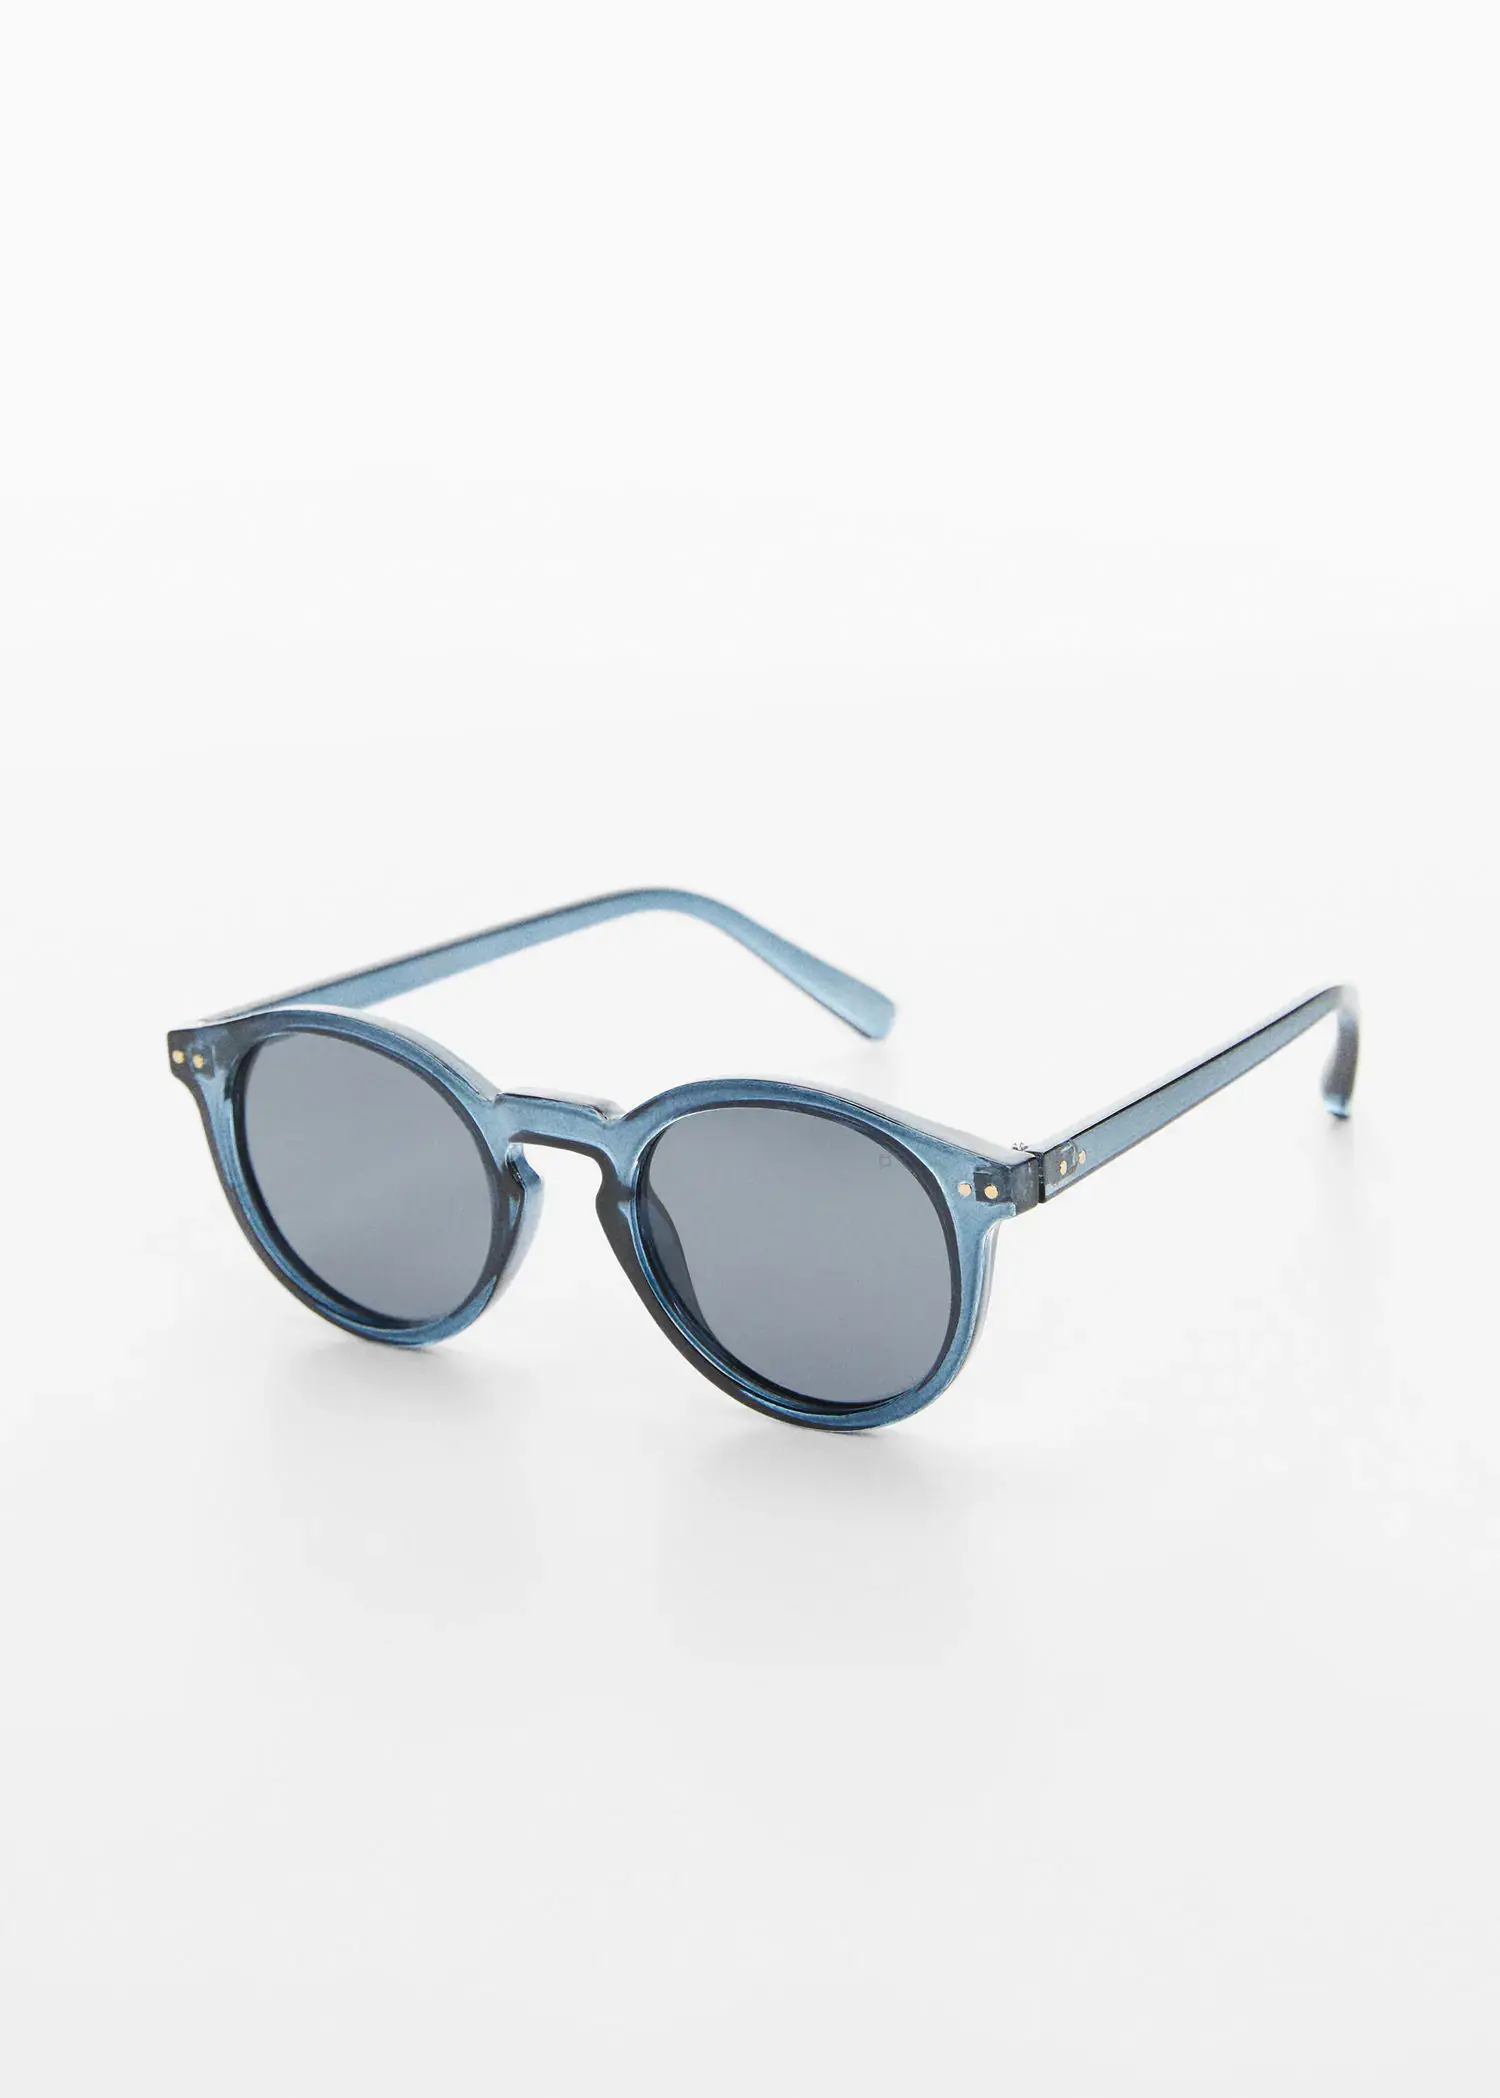 Mango Polarised sunglasses. a pair of sunglasses sitting on top of a white table. 